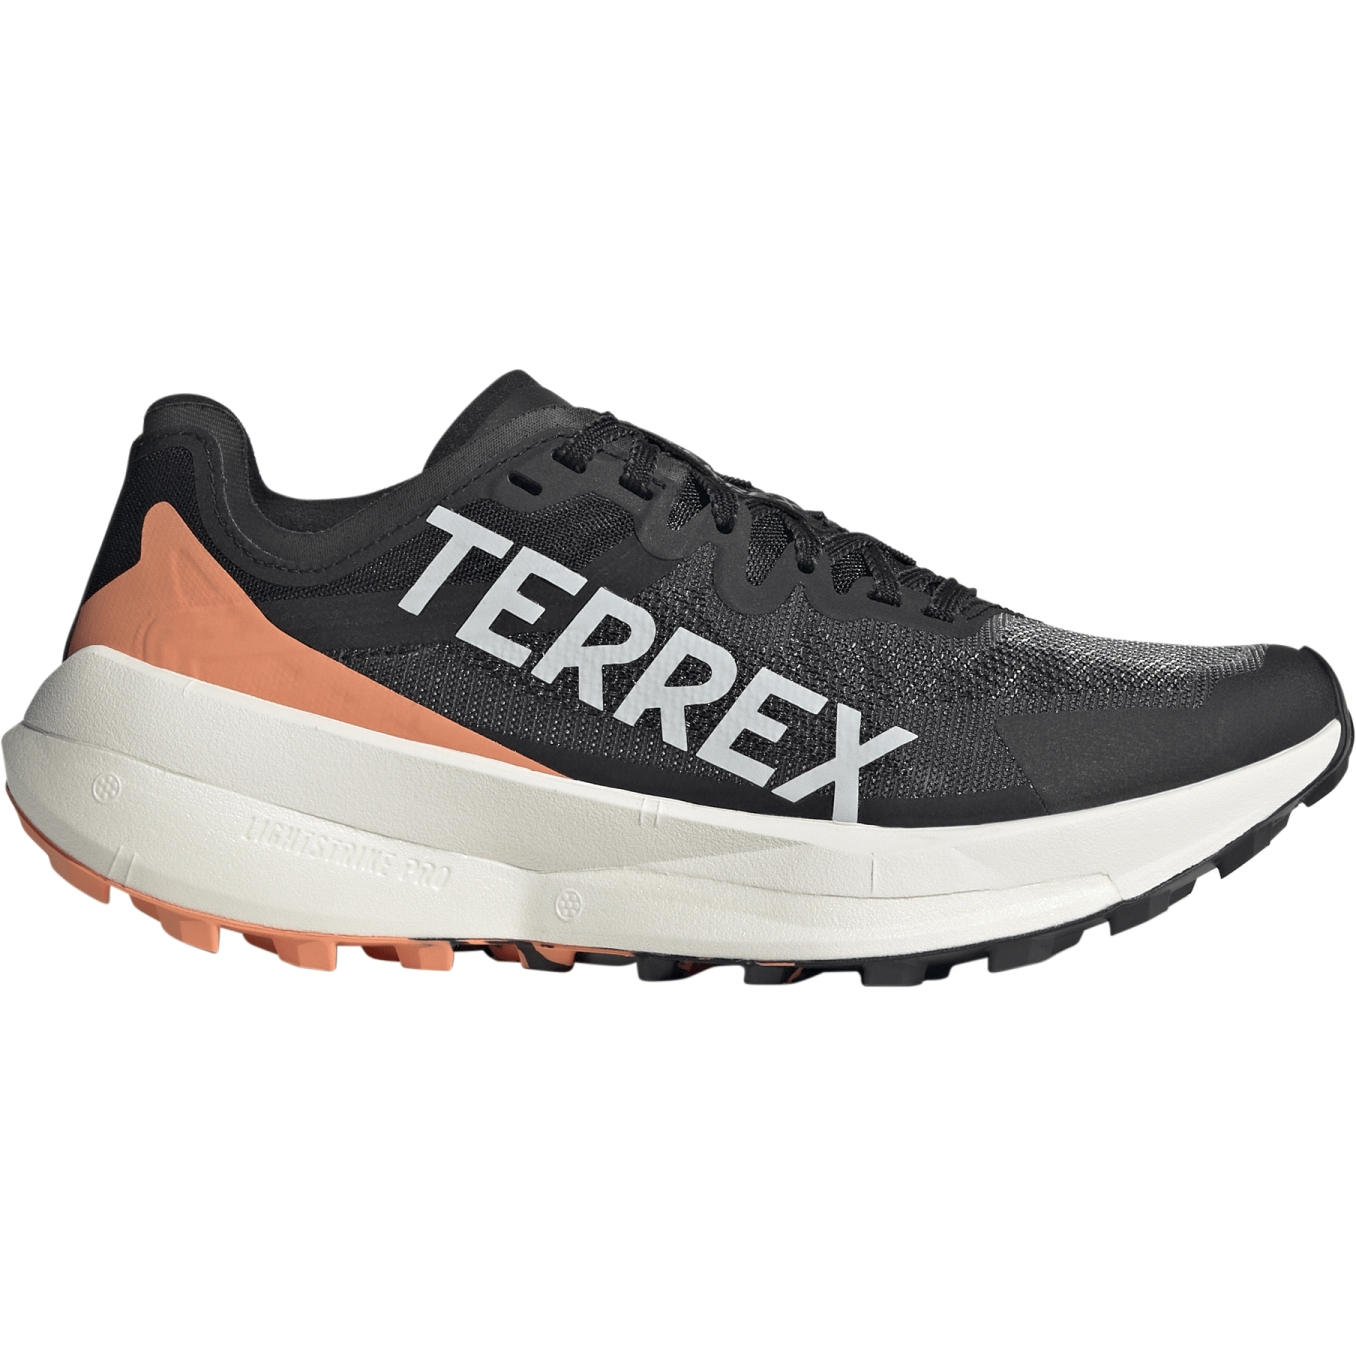 Image of adidas TERREX Agravic Speed Trailrunning Shoes Women - core black/grey one/amber tint IE7671